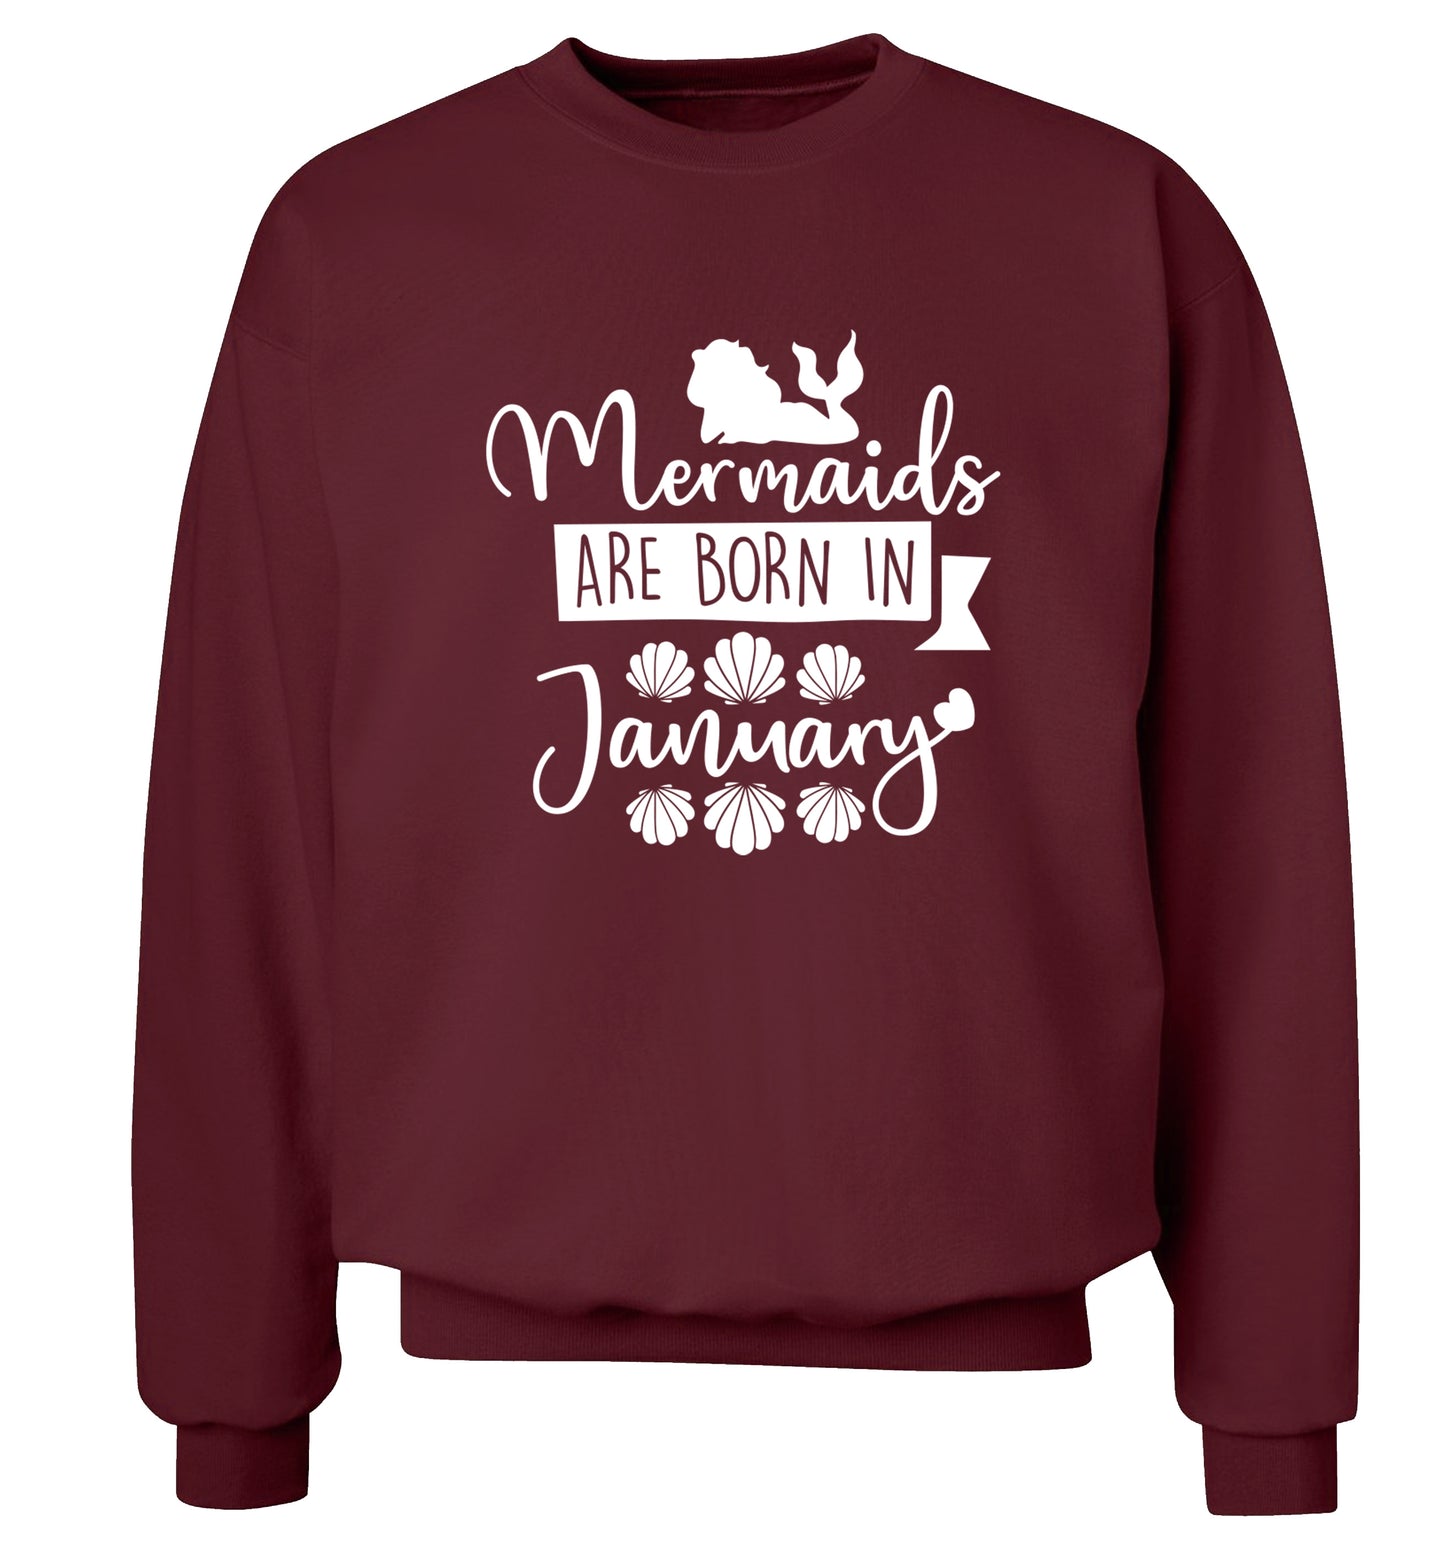 Mermaids are born in January Adult's unisex maroon Sweater 2XL